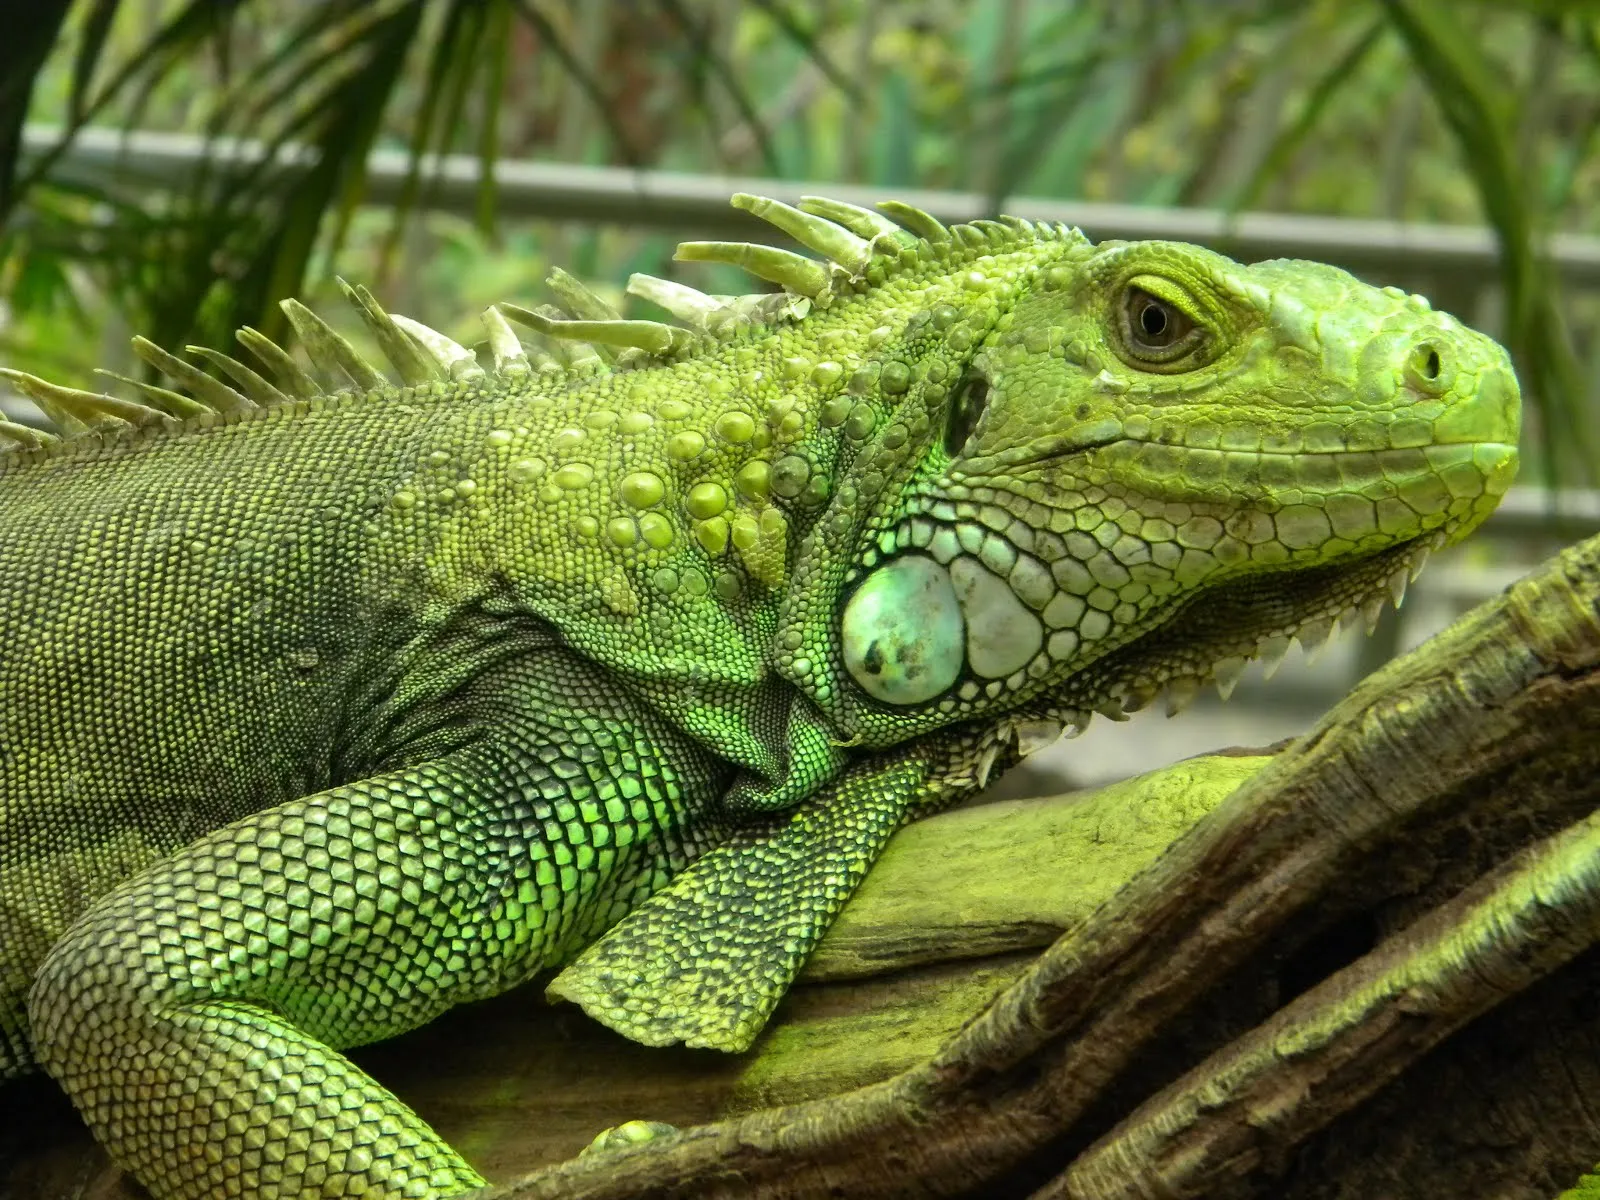 Best Pets Blog: Your Iguana Cage, What to Consider